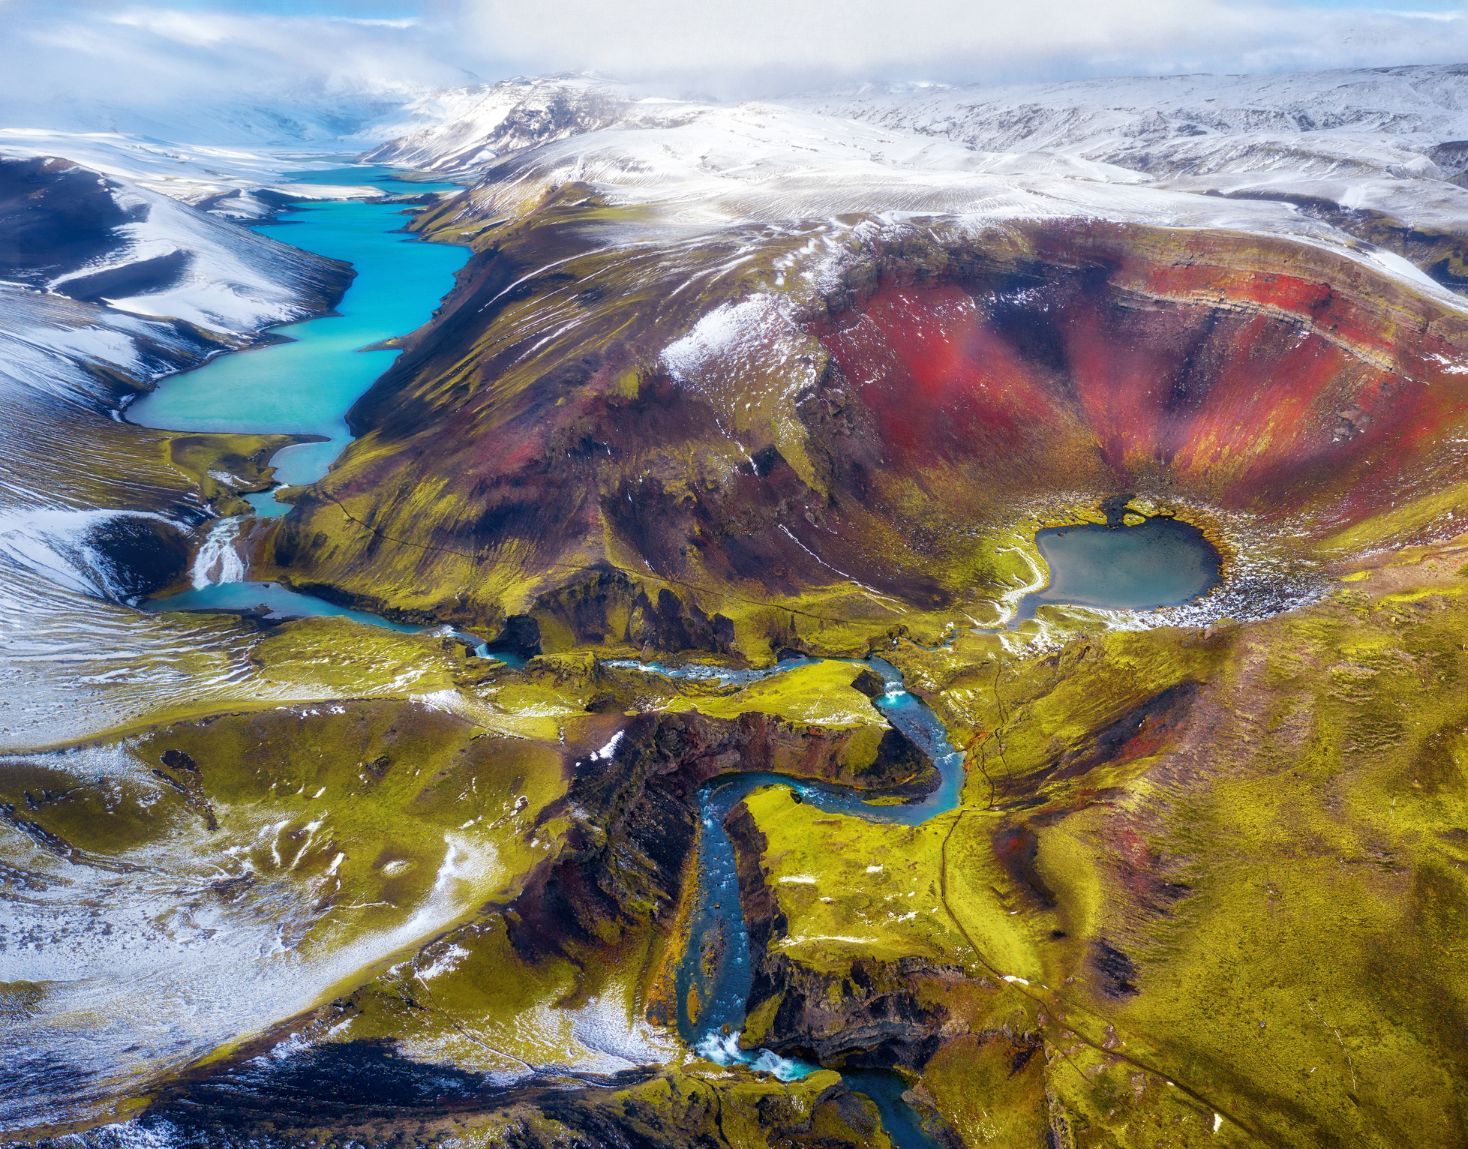 Iceland craters & lagoons | Beautiful landscapes around the world